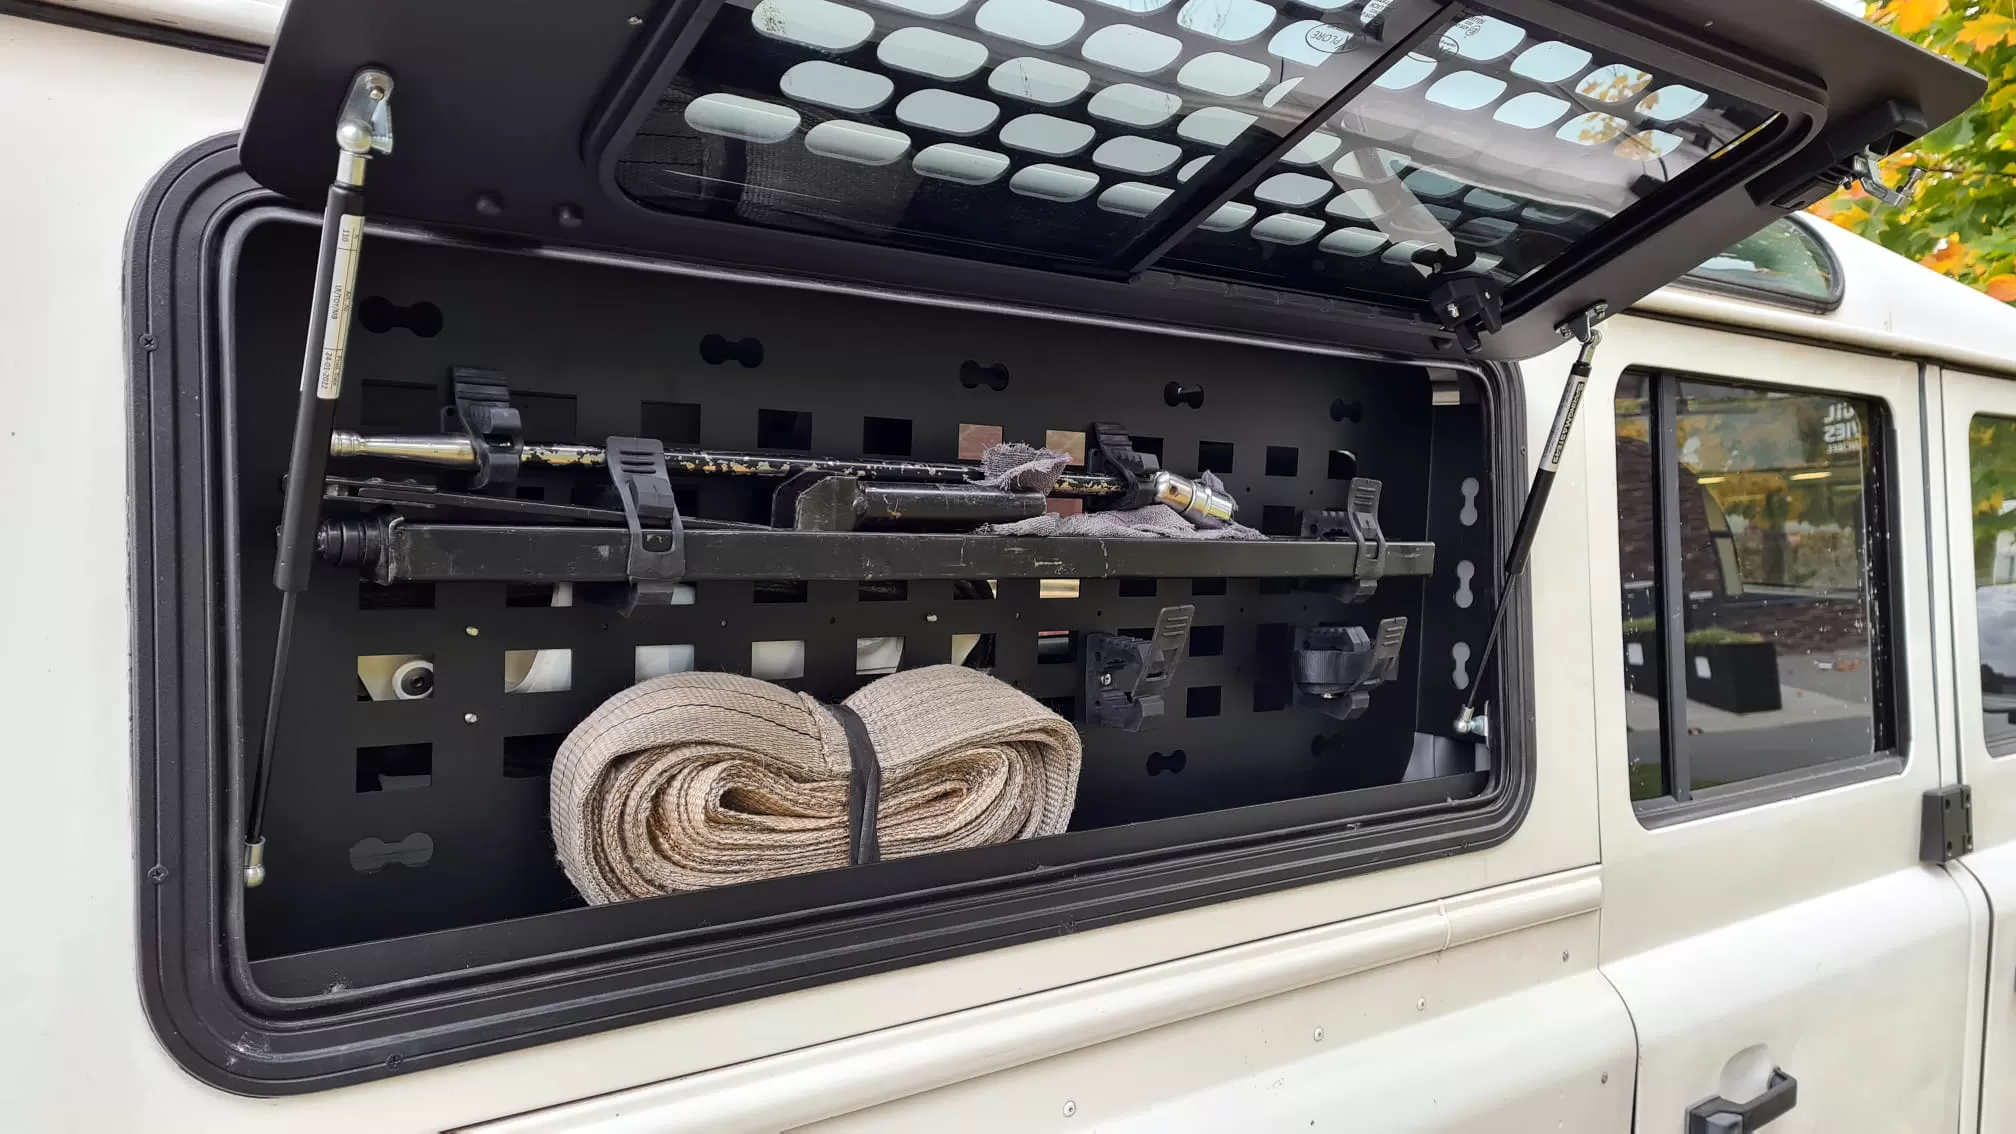 Explore Glazing storage box for the gull wing window Land Rover Defender 90 - 110